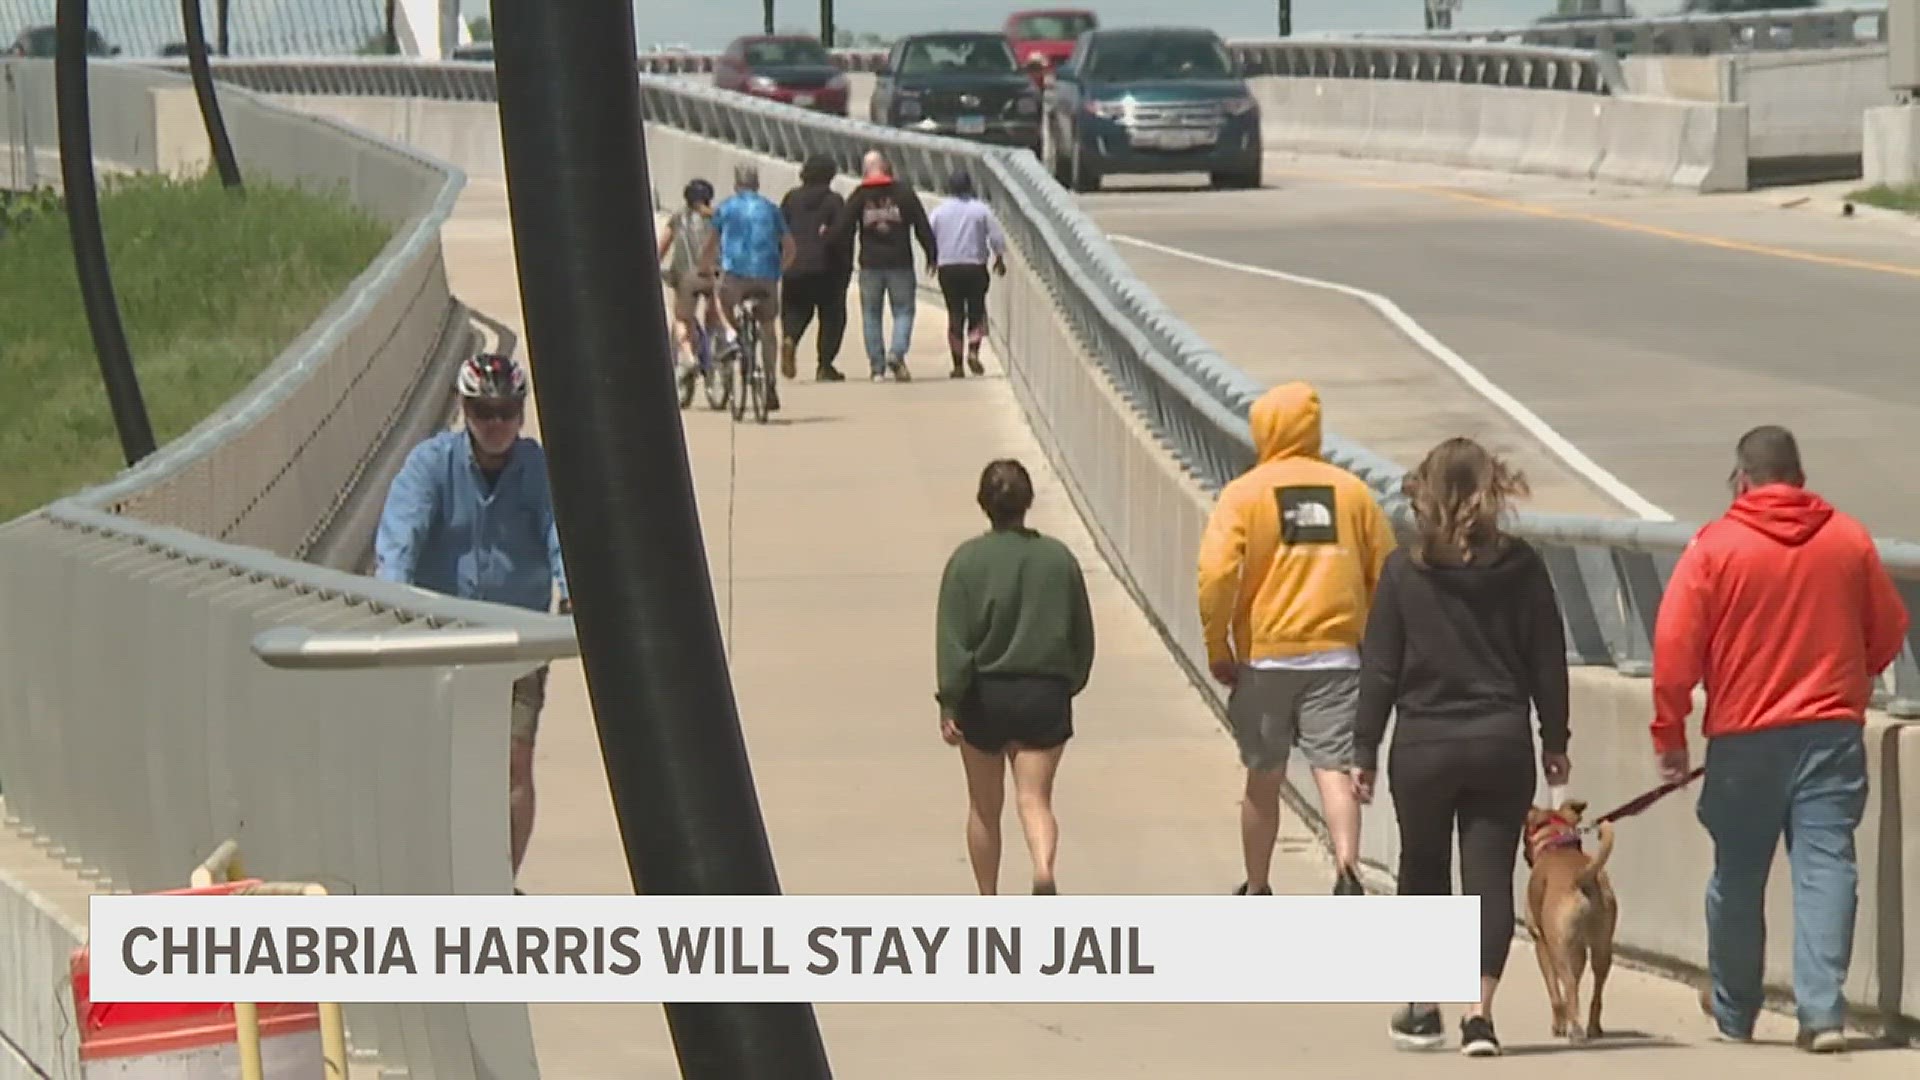 Chhabria Harris remains in prison for the murder of two people on the I-74 pedestrian bridge. Her lawyer filing a petition for release, which the judge denied.